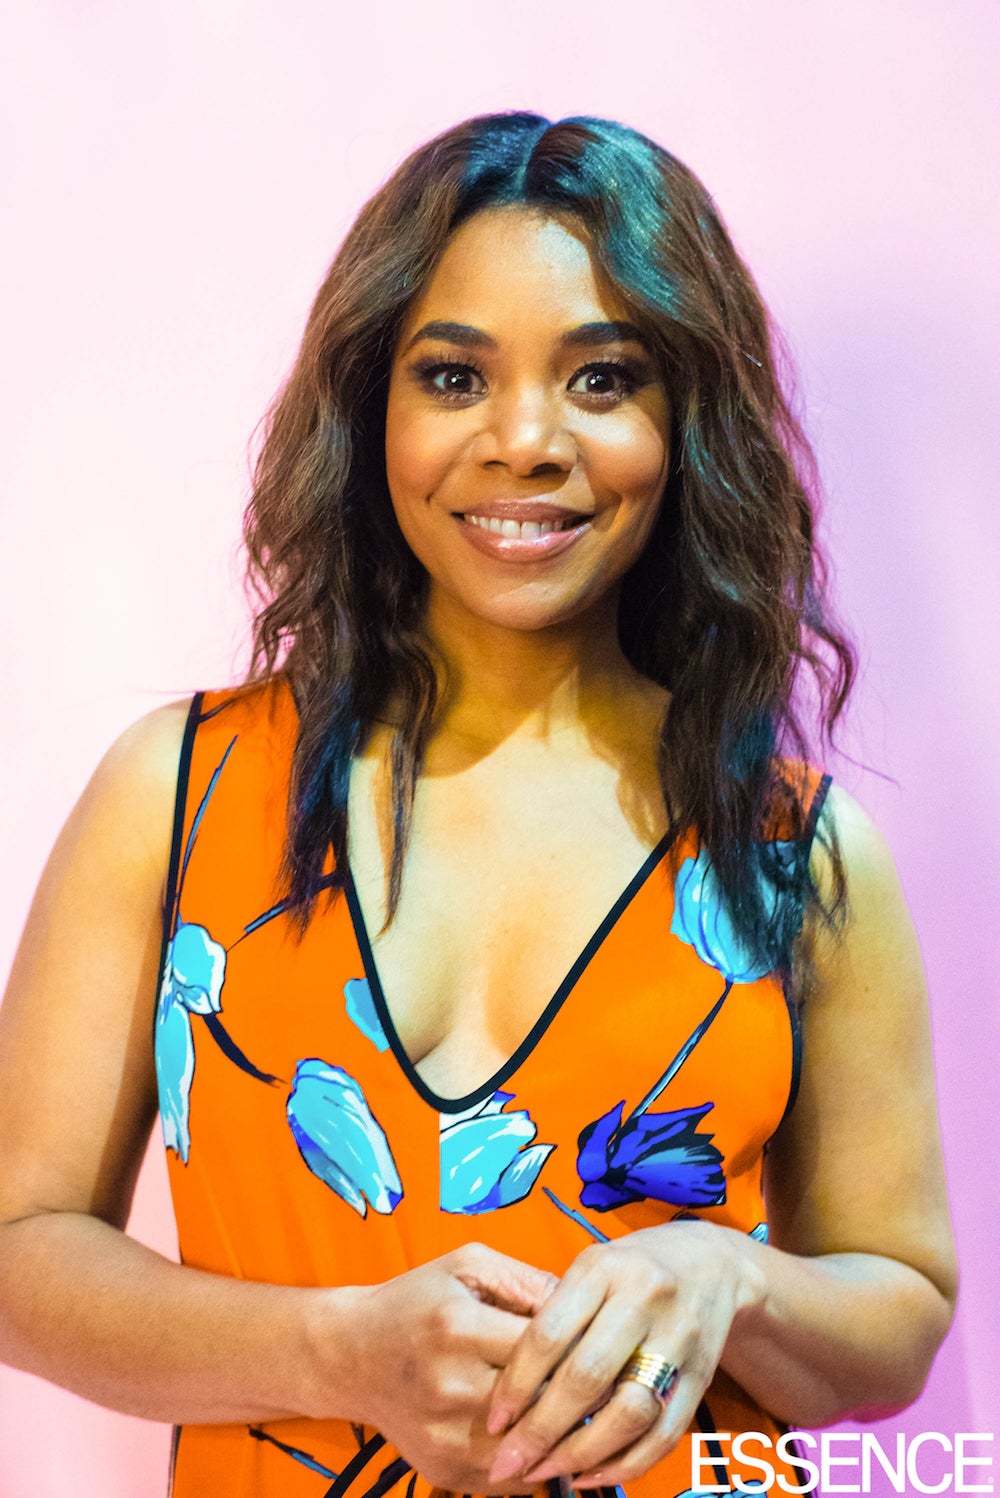 Regina Hall Laughs Off Rumors That Her Bestie Sanaa Lathan Bit Beyoncé: 'I Thought It Was Funny'